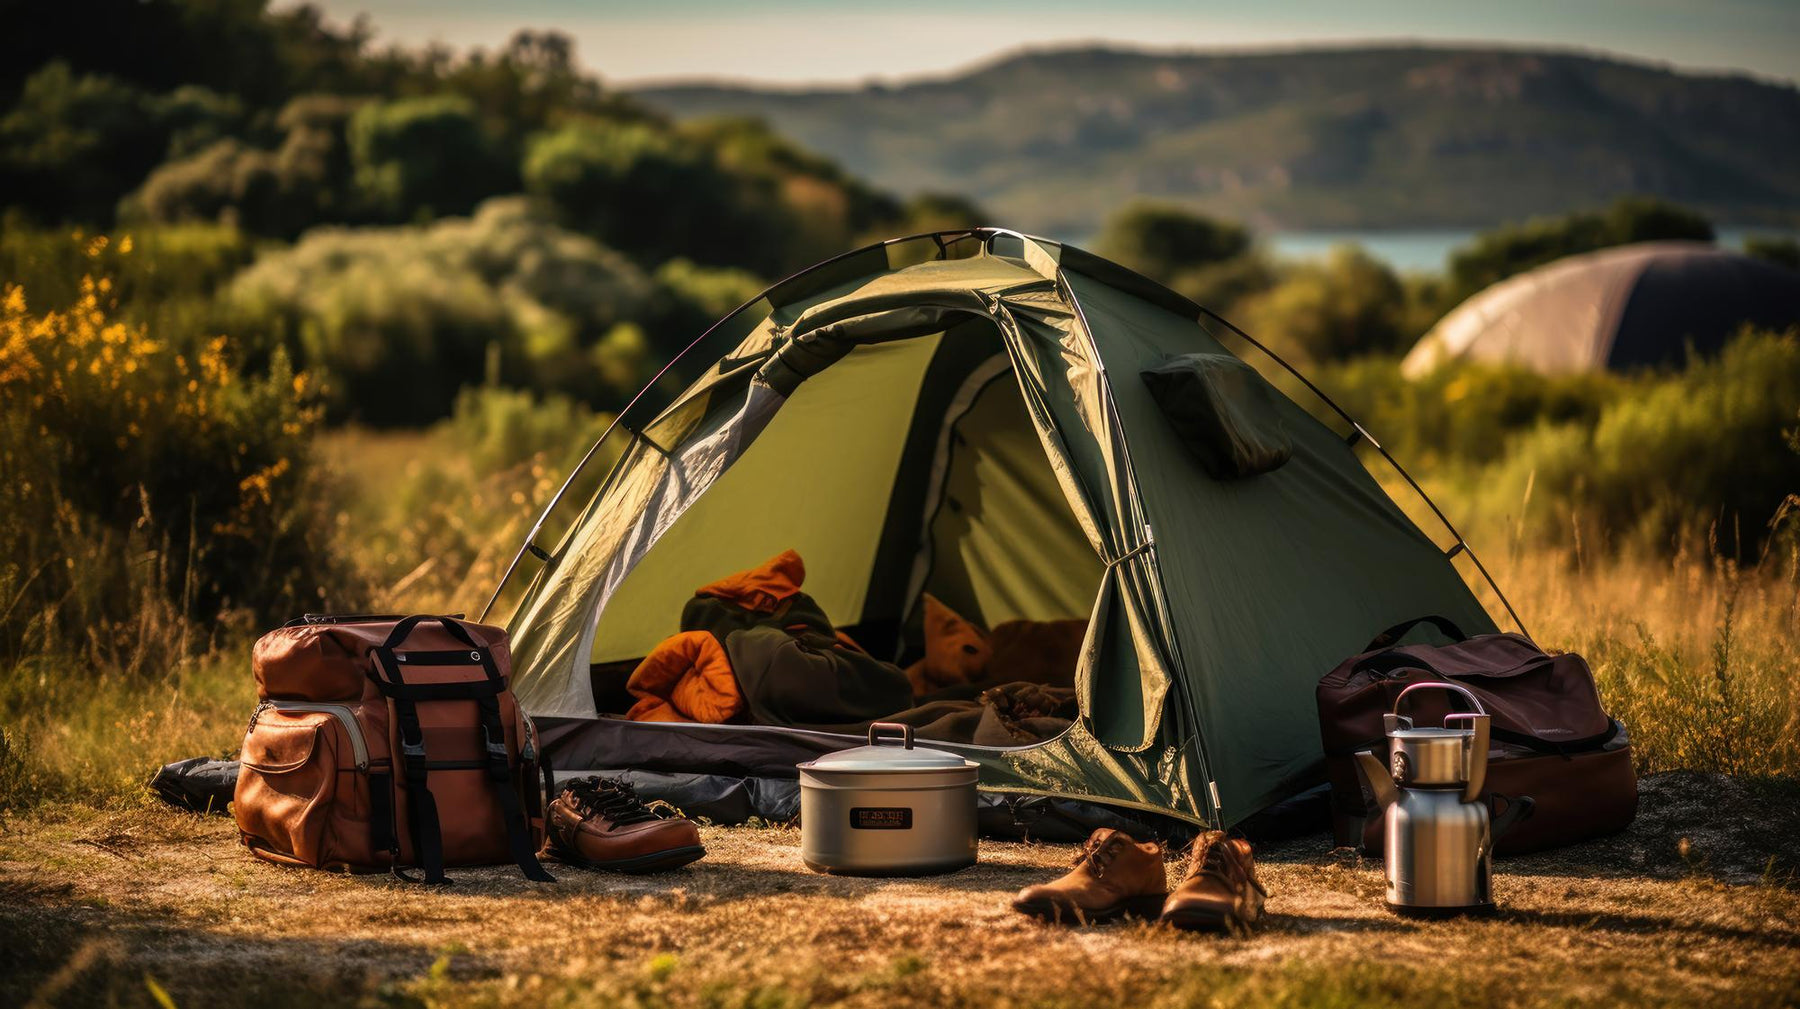 10 Key Safety Guidelines for a Safe Outdoor Camping Experience